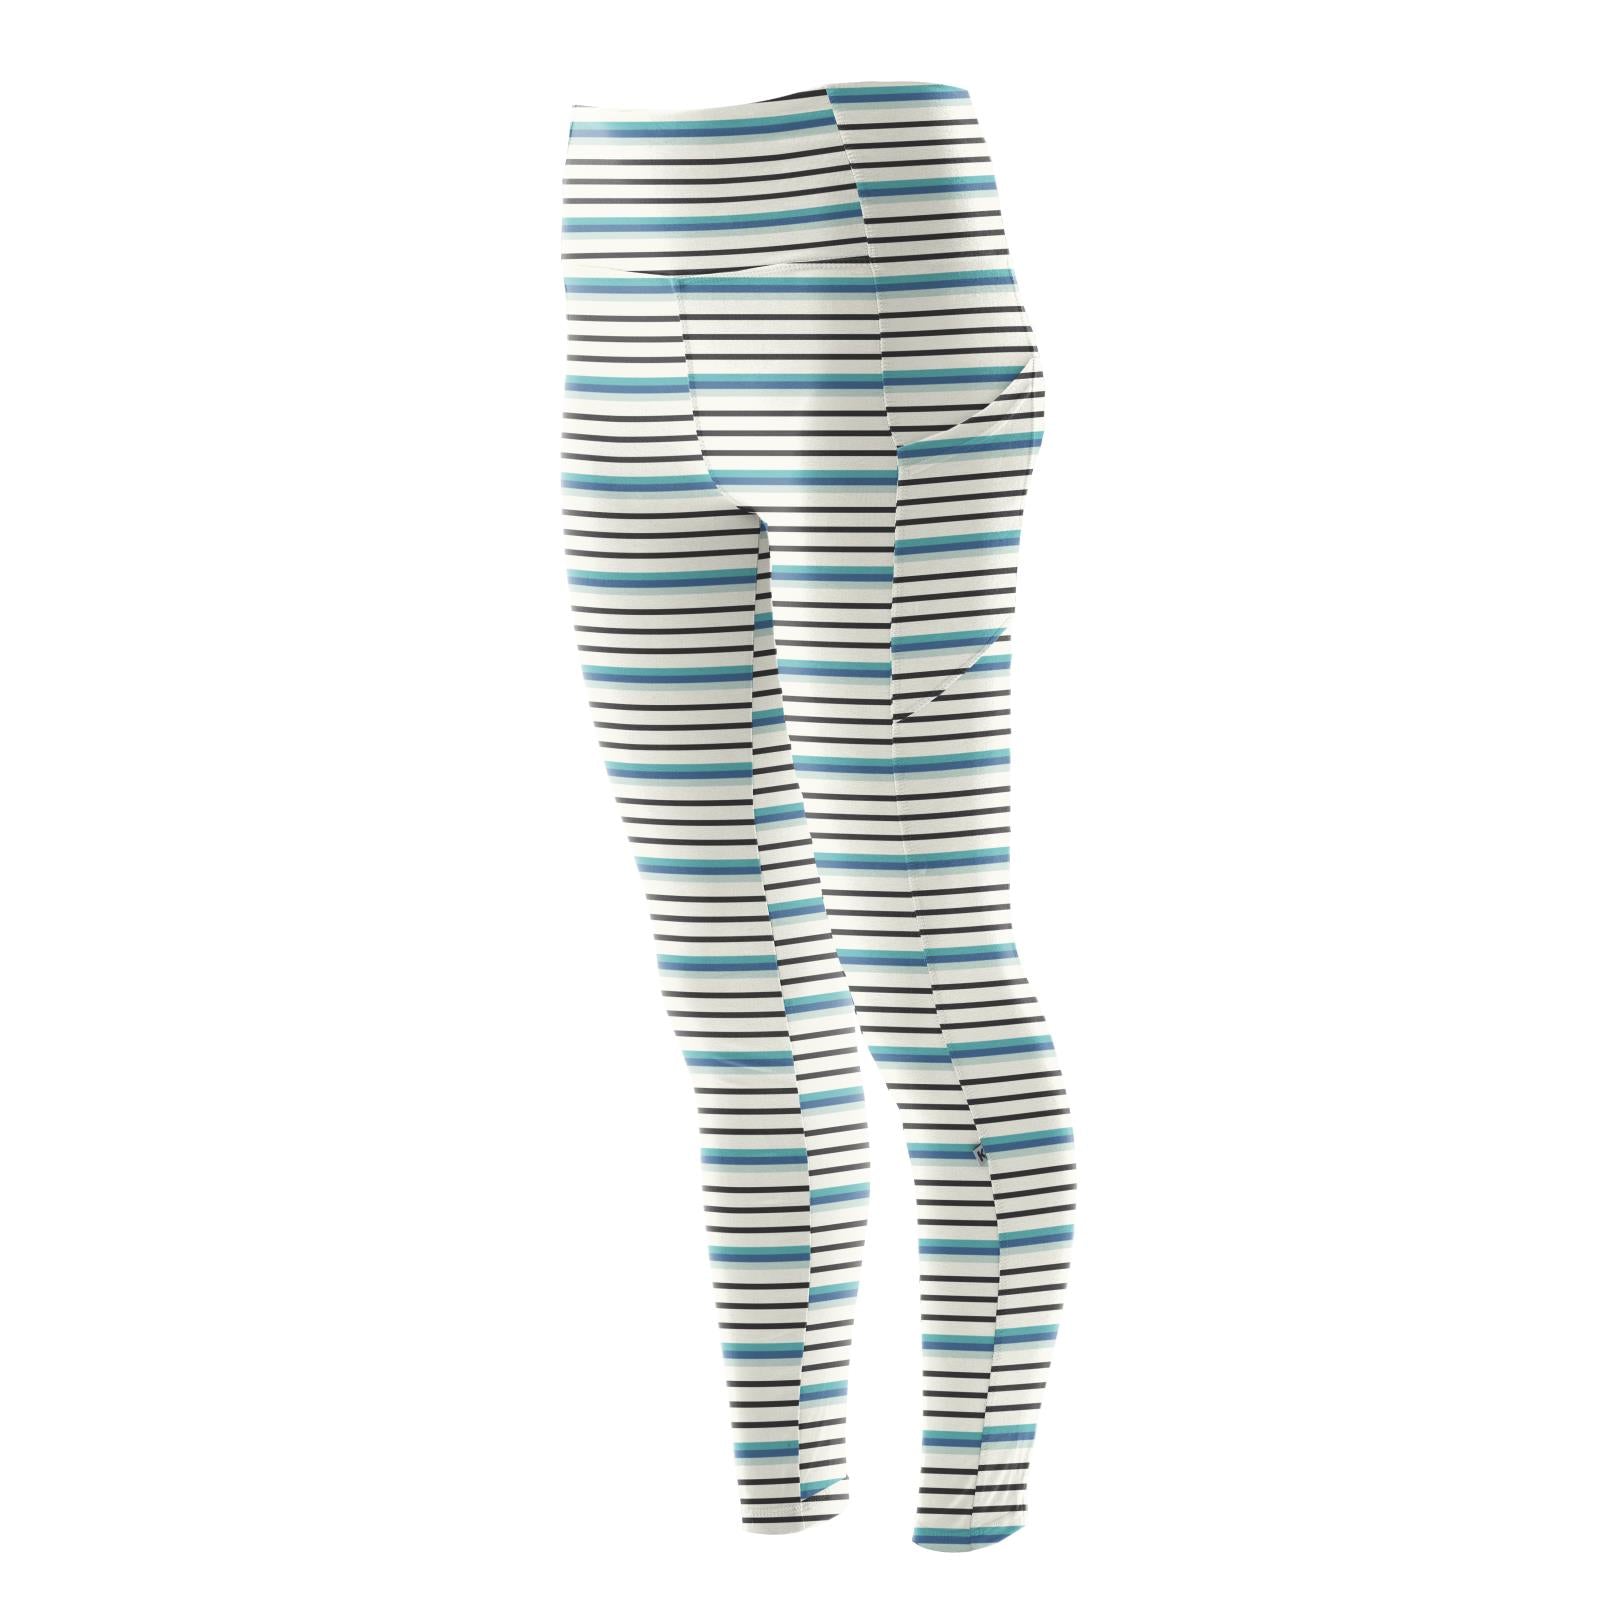 Bamboo Viscose + Organic Cotton High-Waisted 3/4 Leggings with Pockets